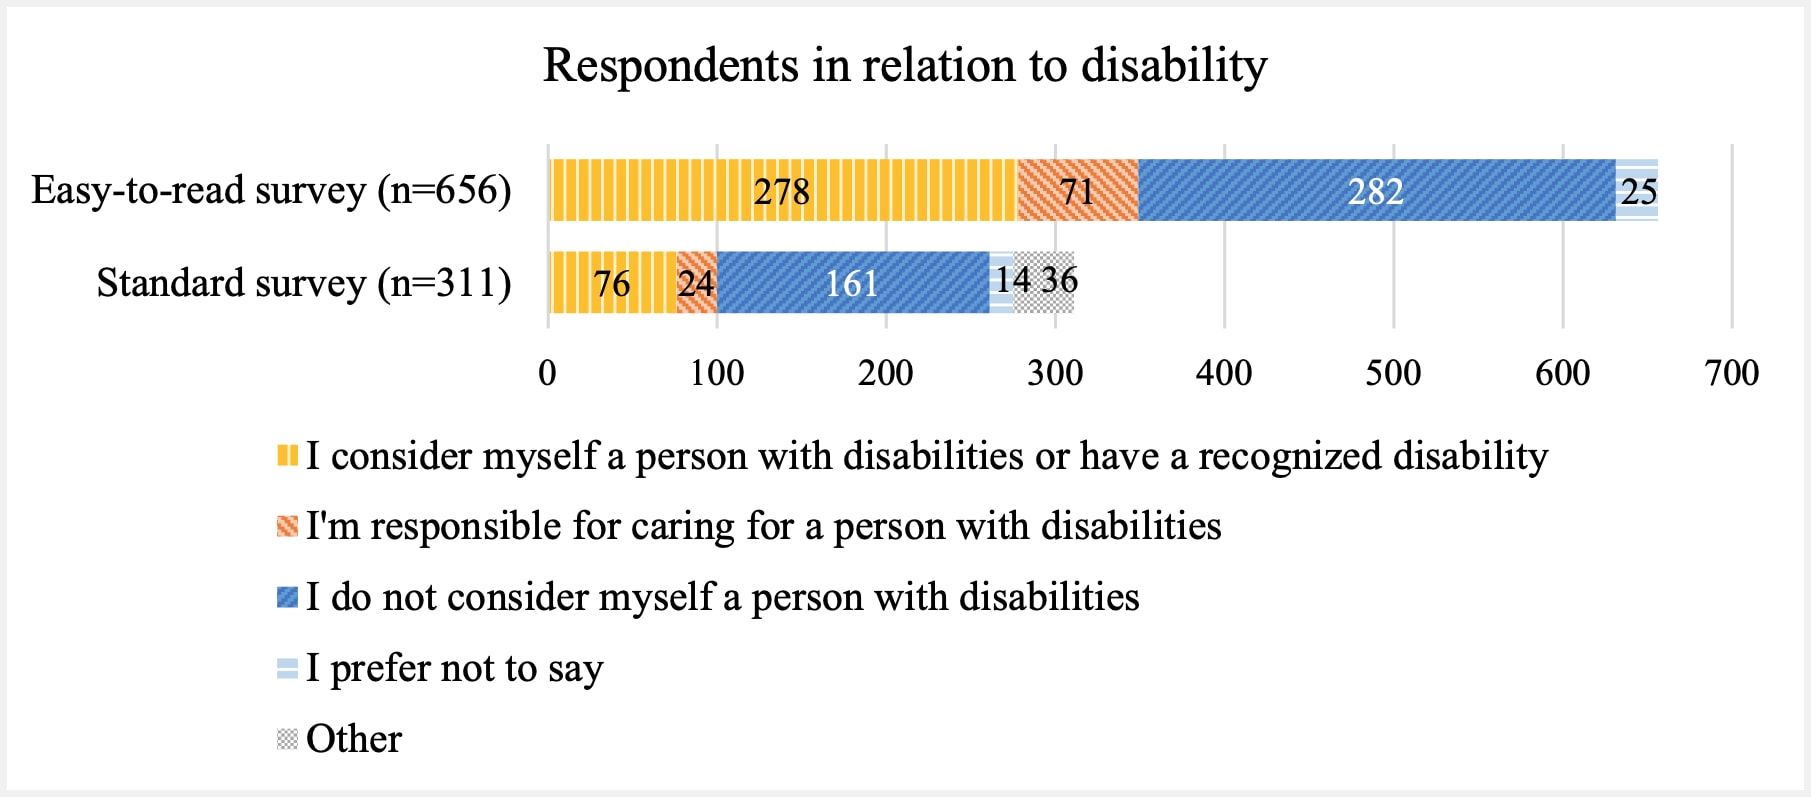 Graph showing the percentage of people with disabilities versus people without disabilities who responded to the survey